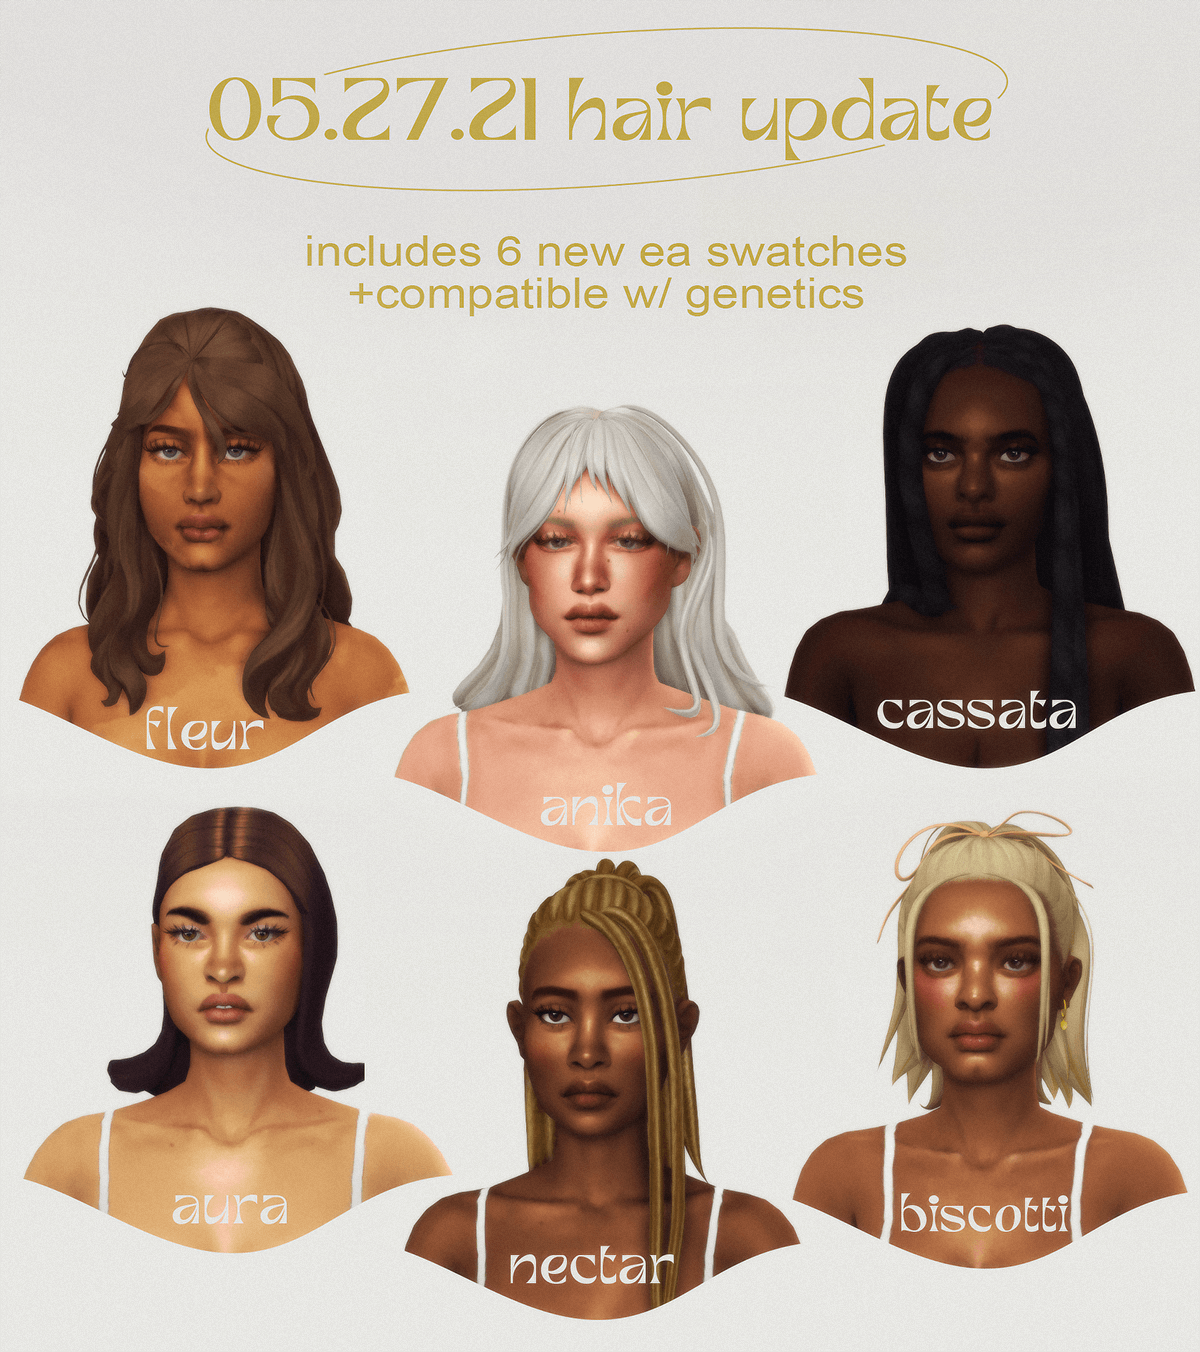 The Sims 4 updated hair | The Sims Book